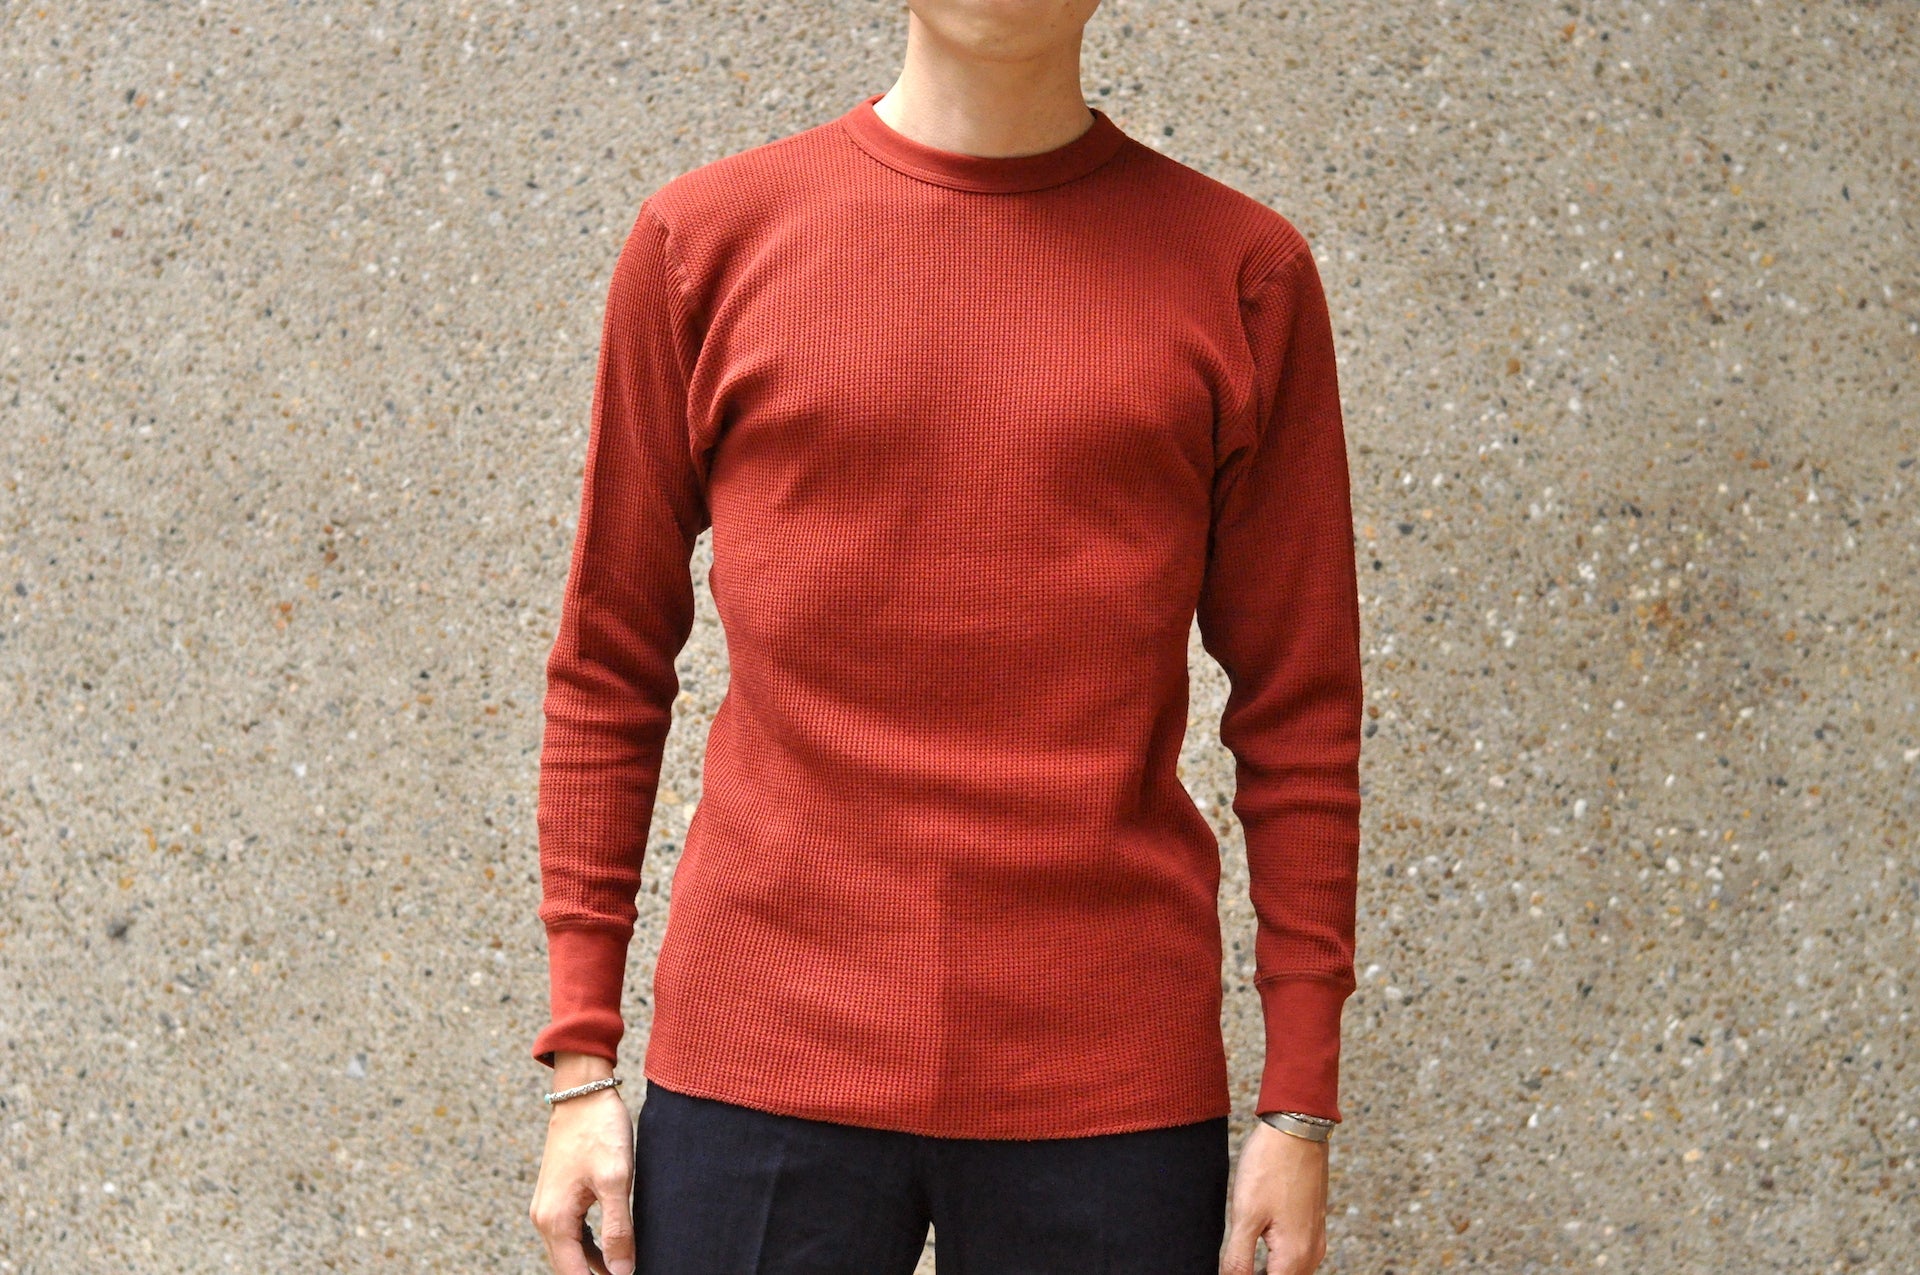 Freewheelers "Crew Neck" L/S Thermal (Red)